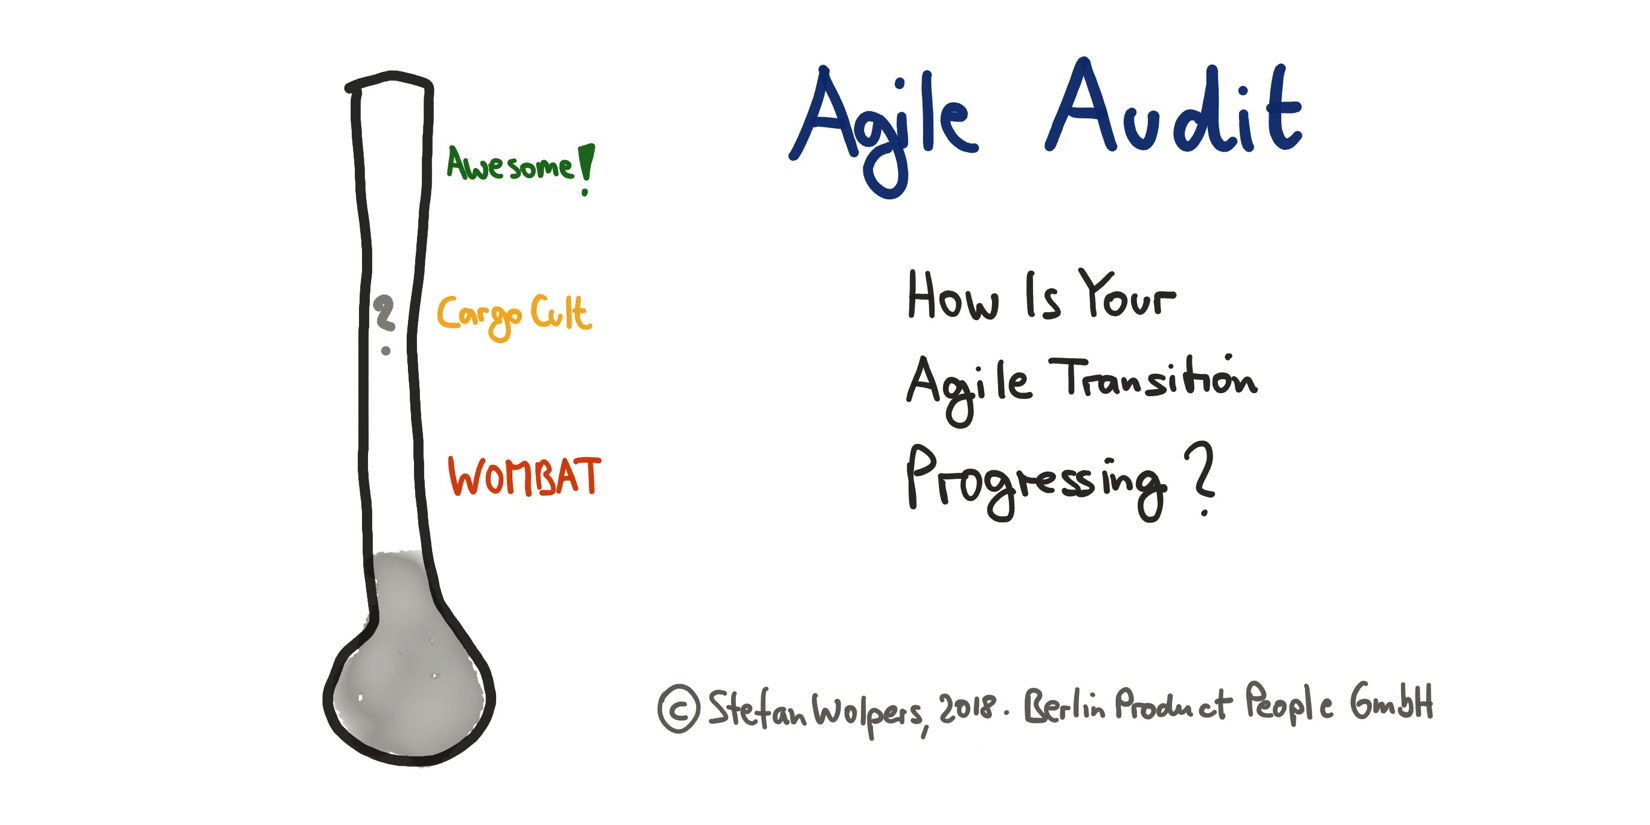 Agile Audit — Is your agile transformation progressing? Berlin Product People GmbH